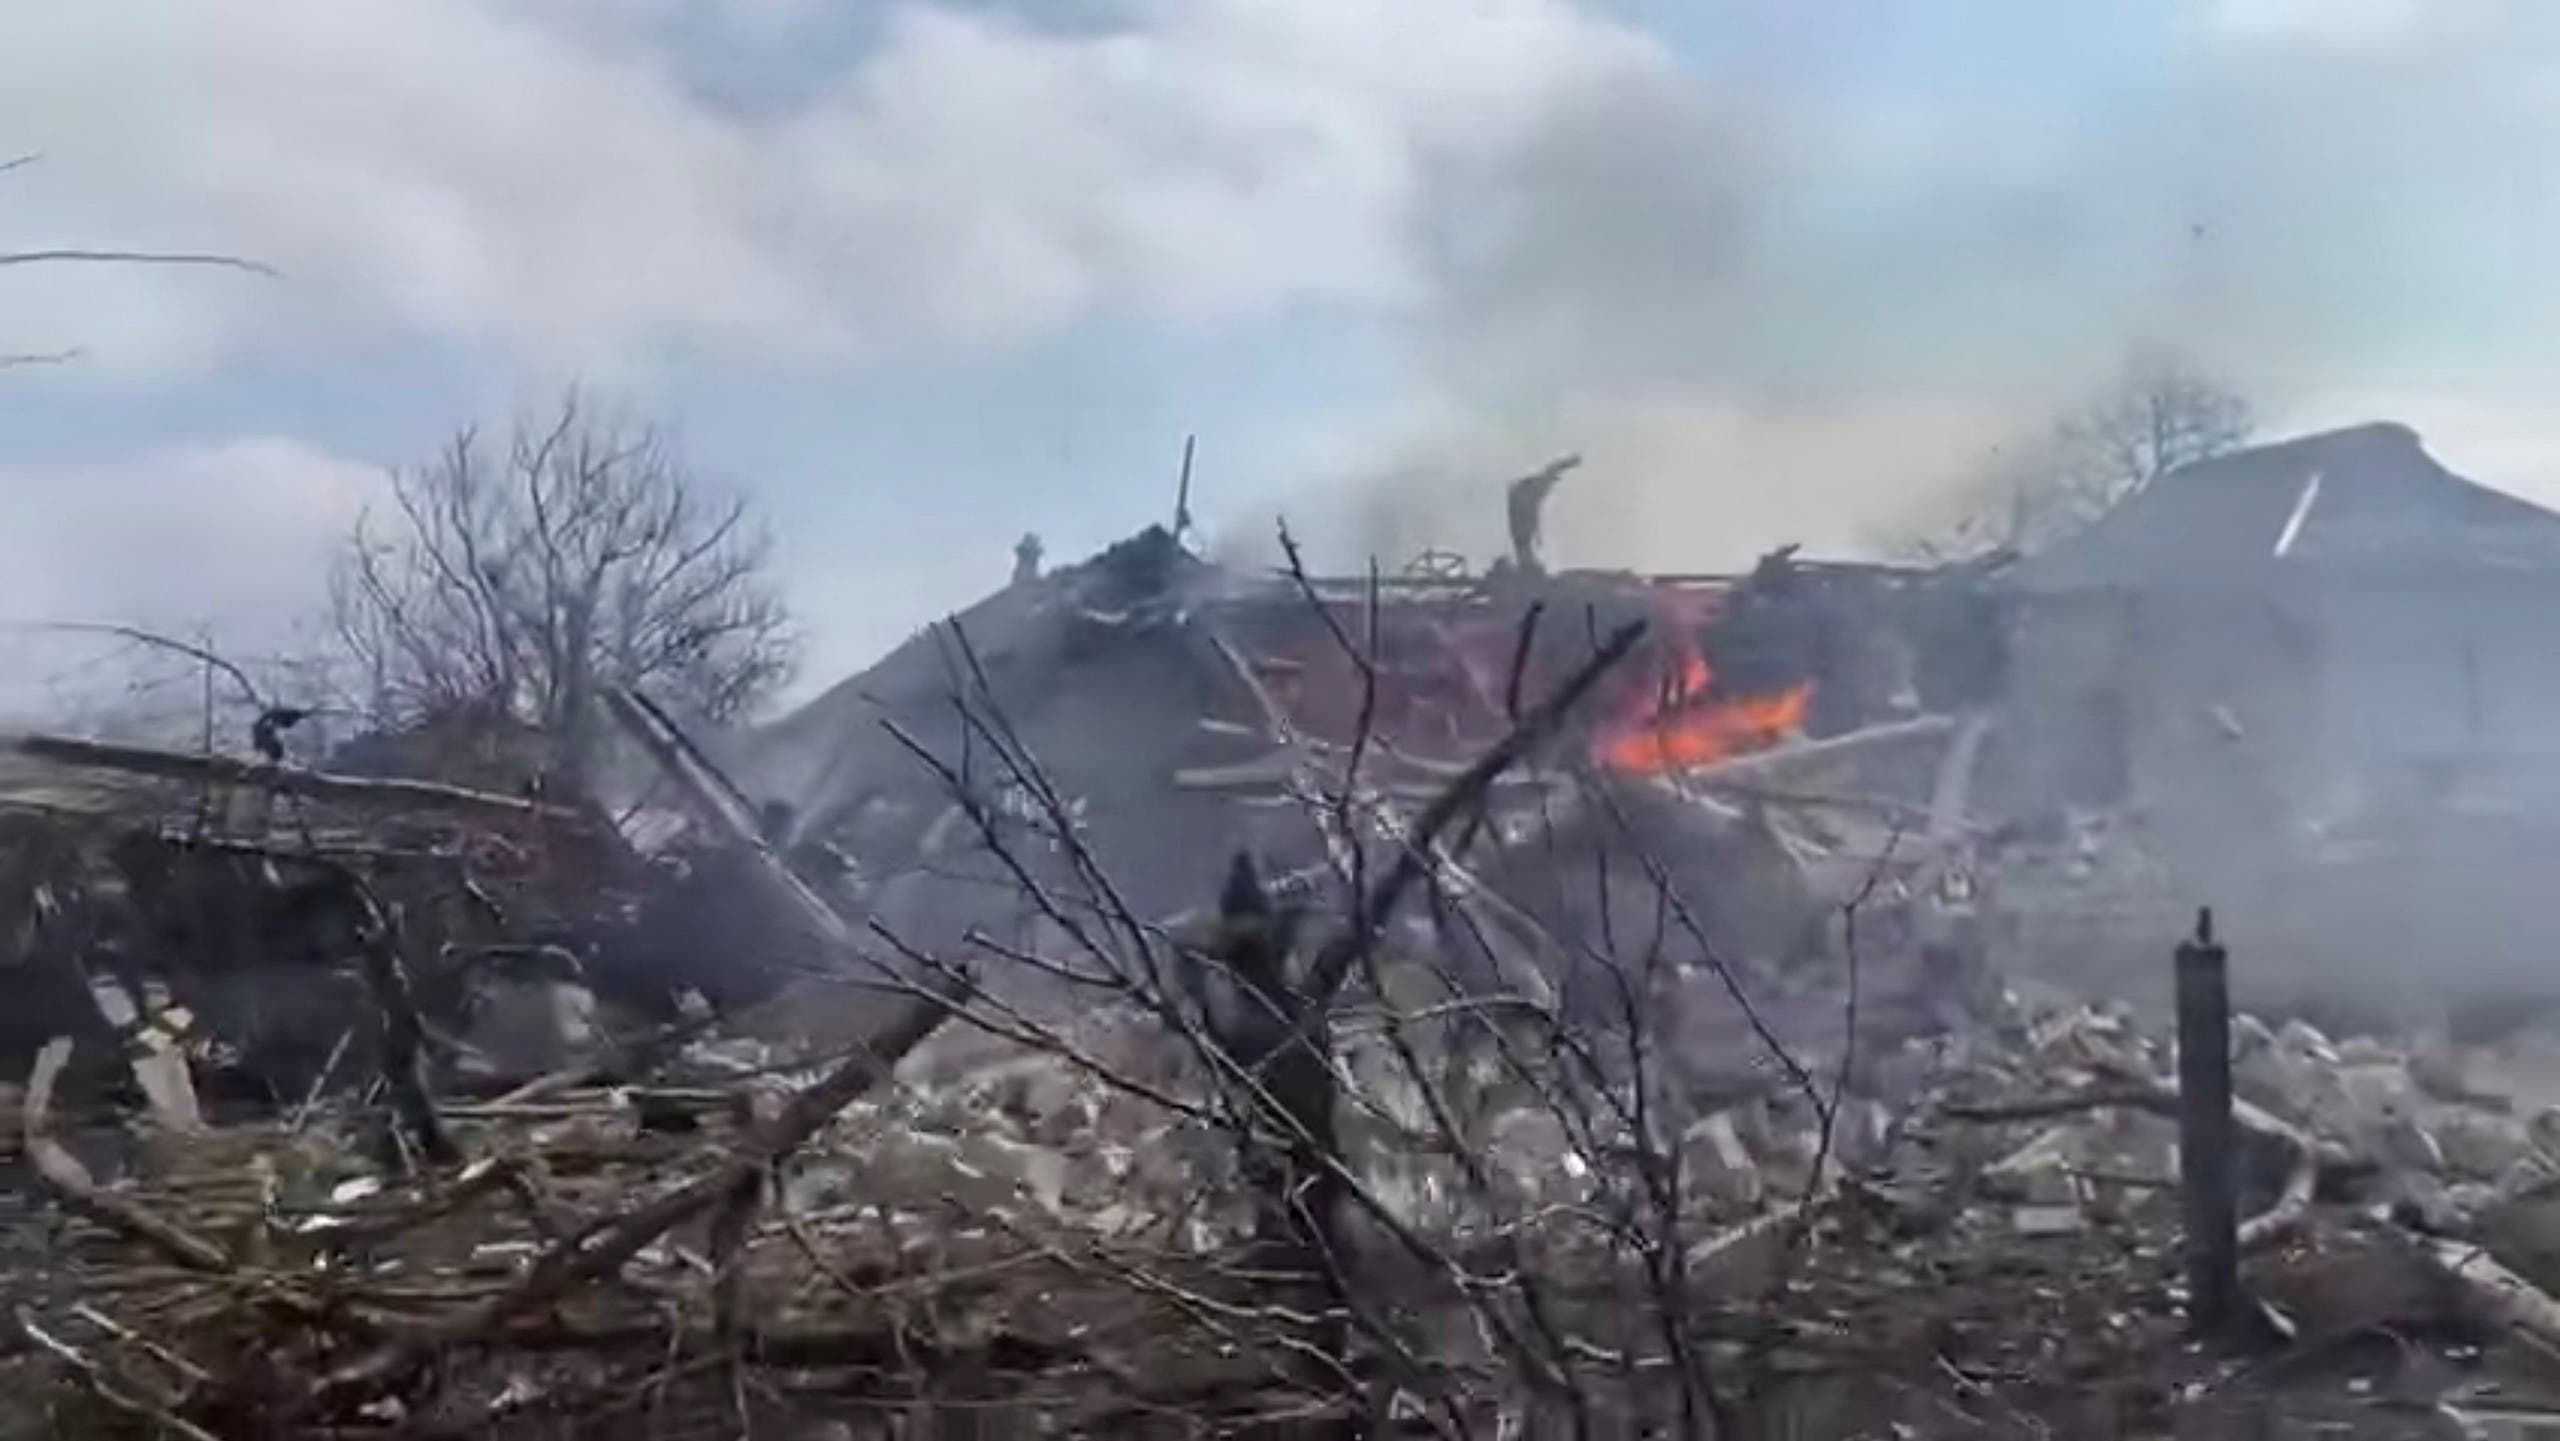 The aftermath of Russian artillery shelling on a residential area in Mariupol where a rocket hit a house, according to the Armed Forces of Ukraine, during the Russian invasion of Ukraine, in Mariupol, Ukraine, is seen in this screengrab from a video uploaded on social media on March 10, 2022. (Reuters)